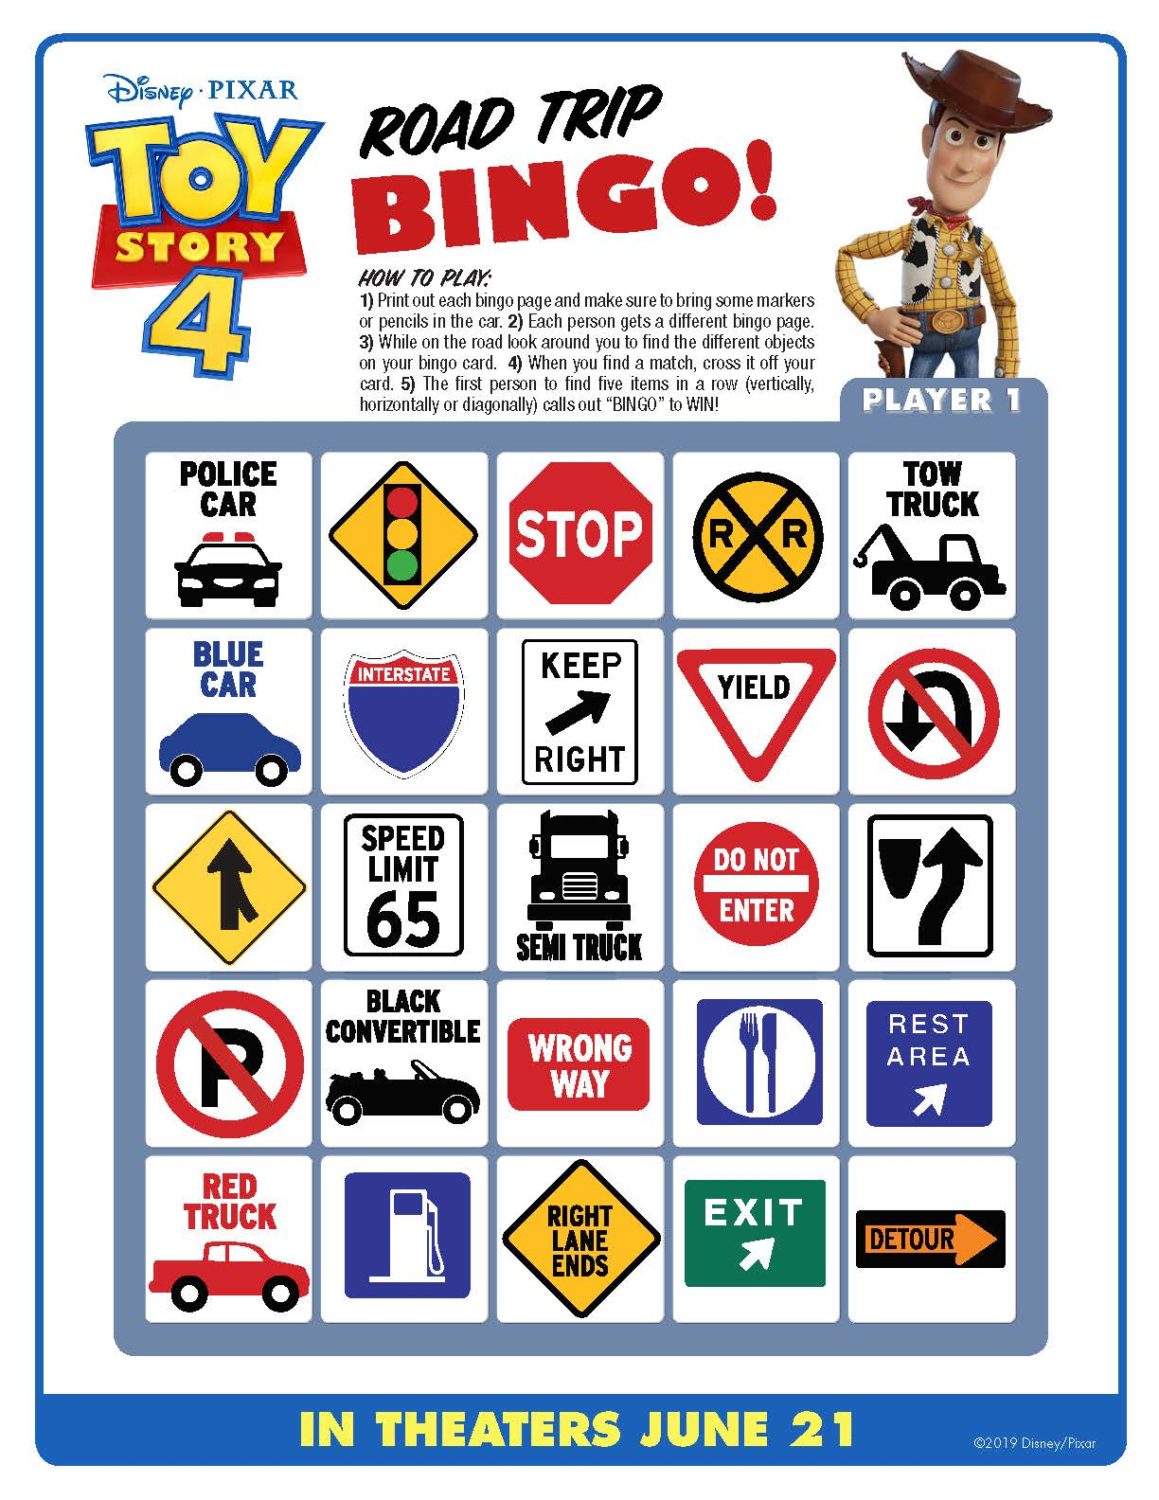 Toy Story 4 Road Trip Bingo Activity Sheet and Coloring Page